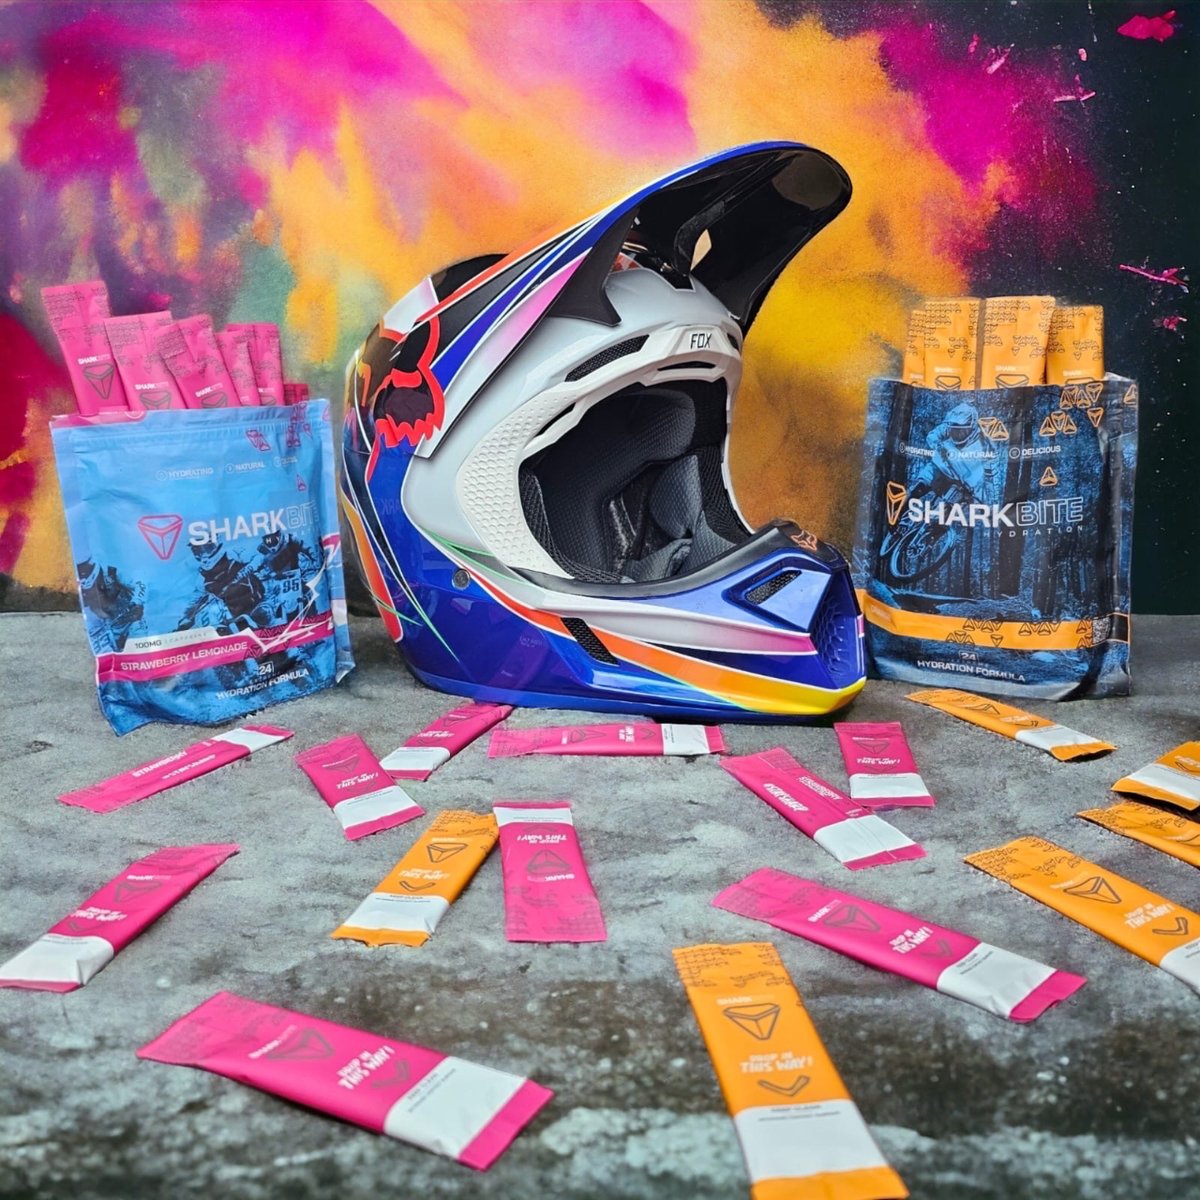 Whether you crave the kick of 100mg natural caffeine in our Strawberry Lemonade or the pure hydration of electrolytes in our Orange blend, we've got you covered! 

Buy any 3 flavours & get our new hydration bottle FREE!

 #FuelYourAdventure #FuelYourFierce #HydrationRevolution